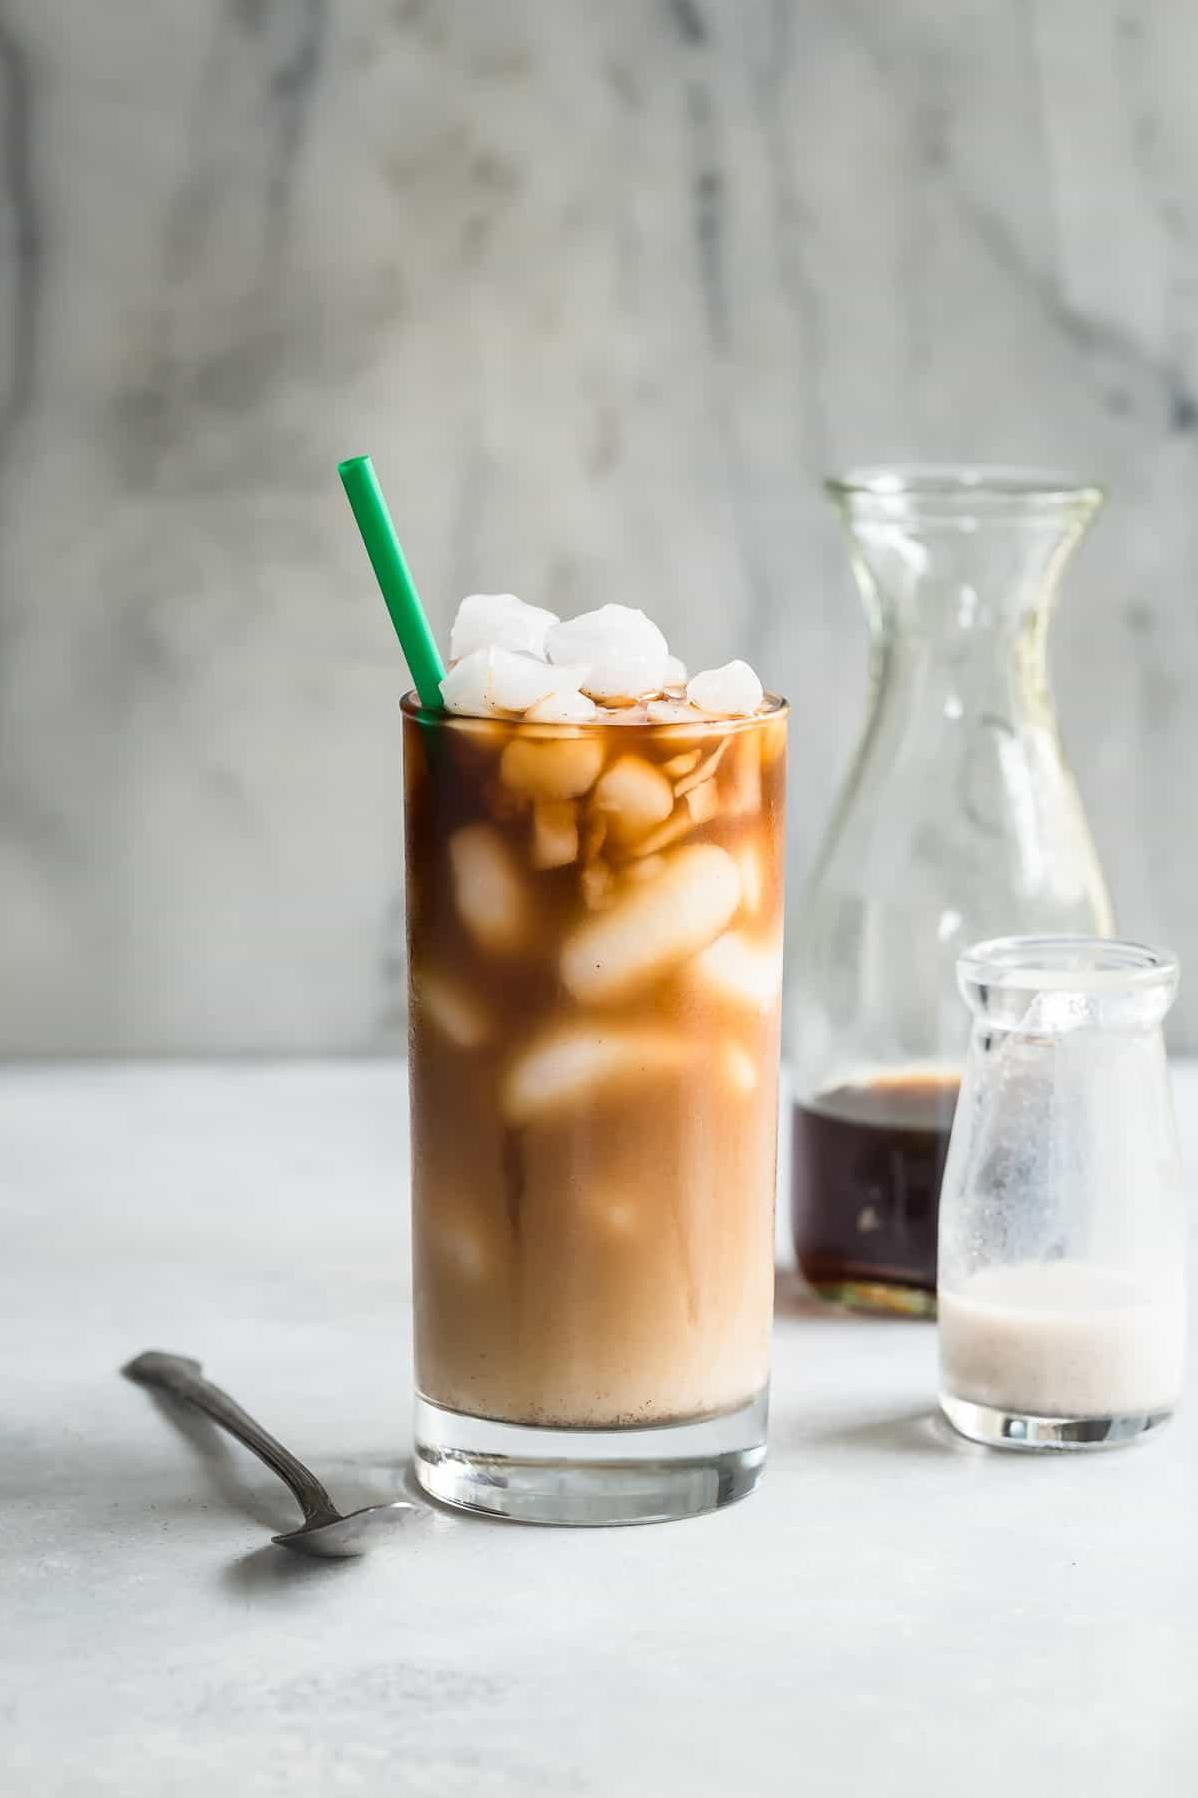  Whether you're a coffee connoisseur or not, you're sure to enjoy this drink.